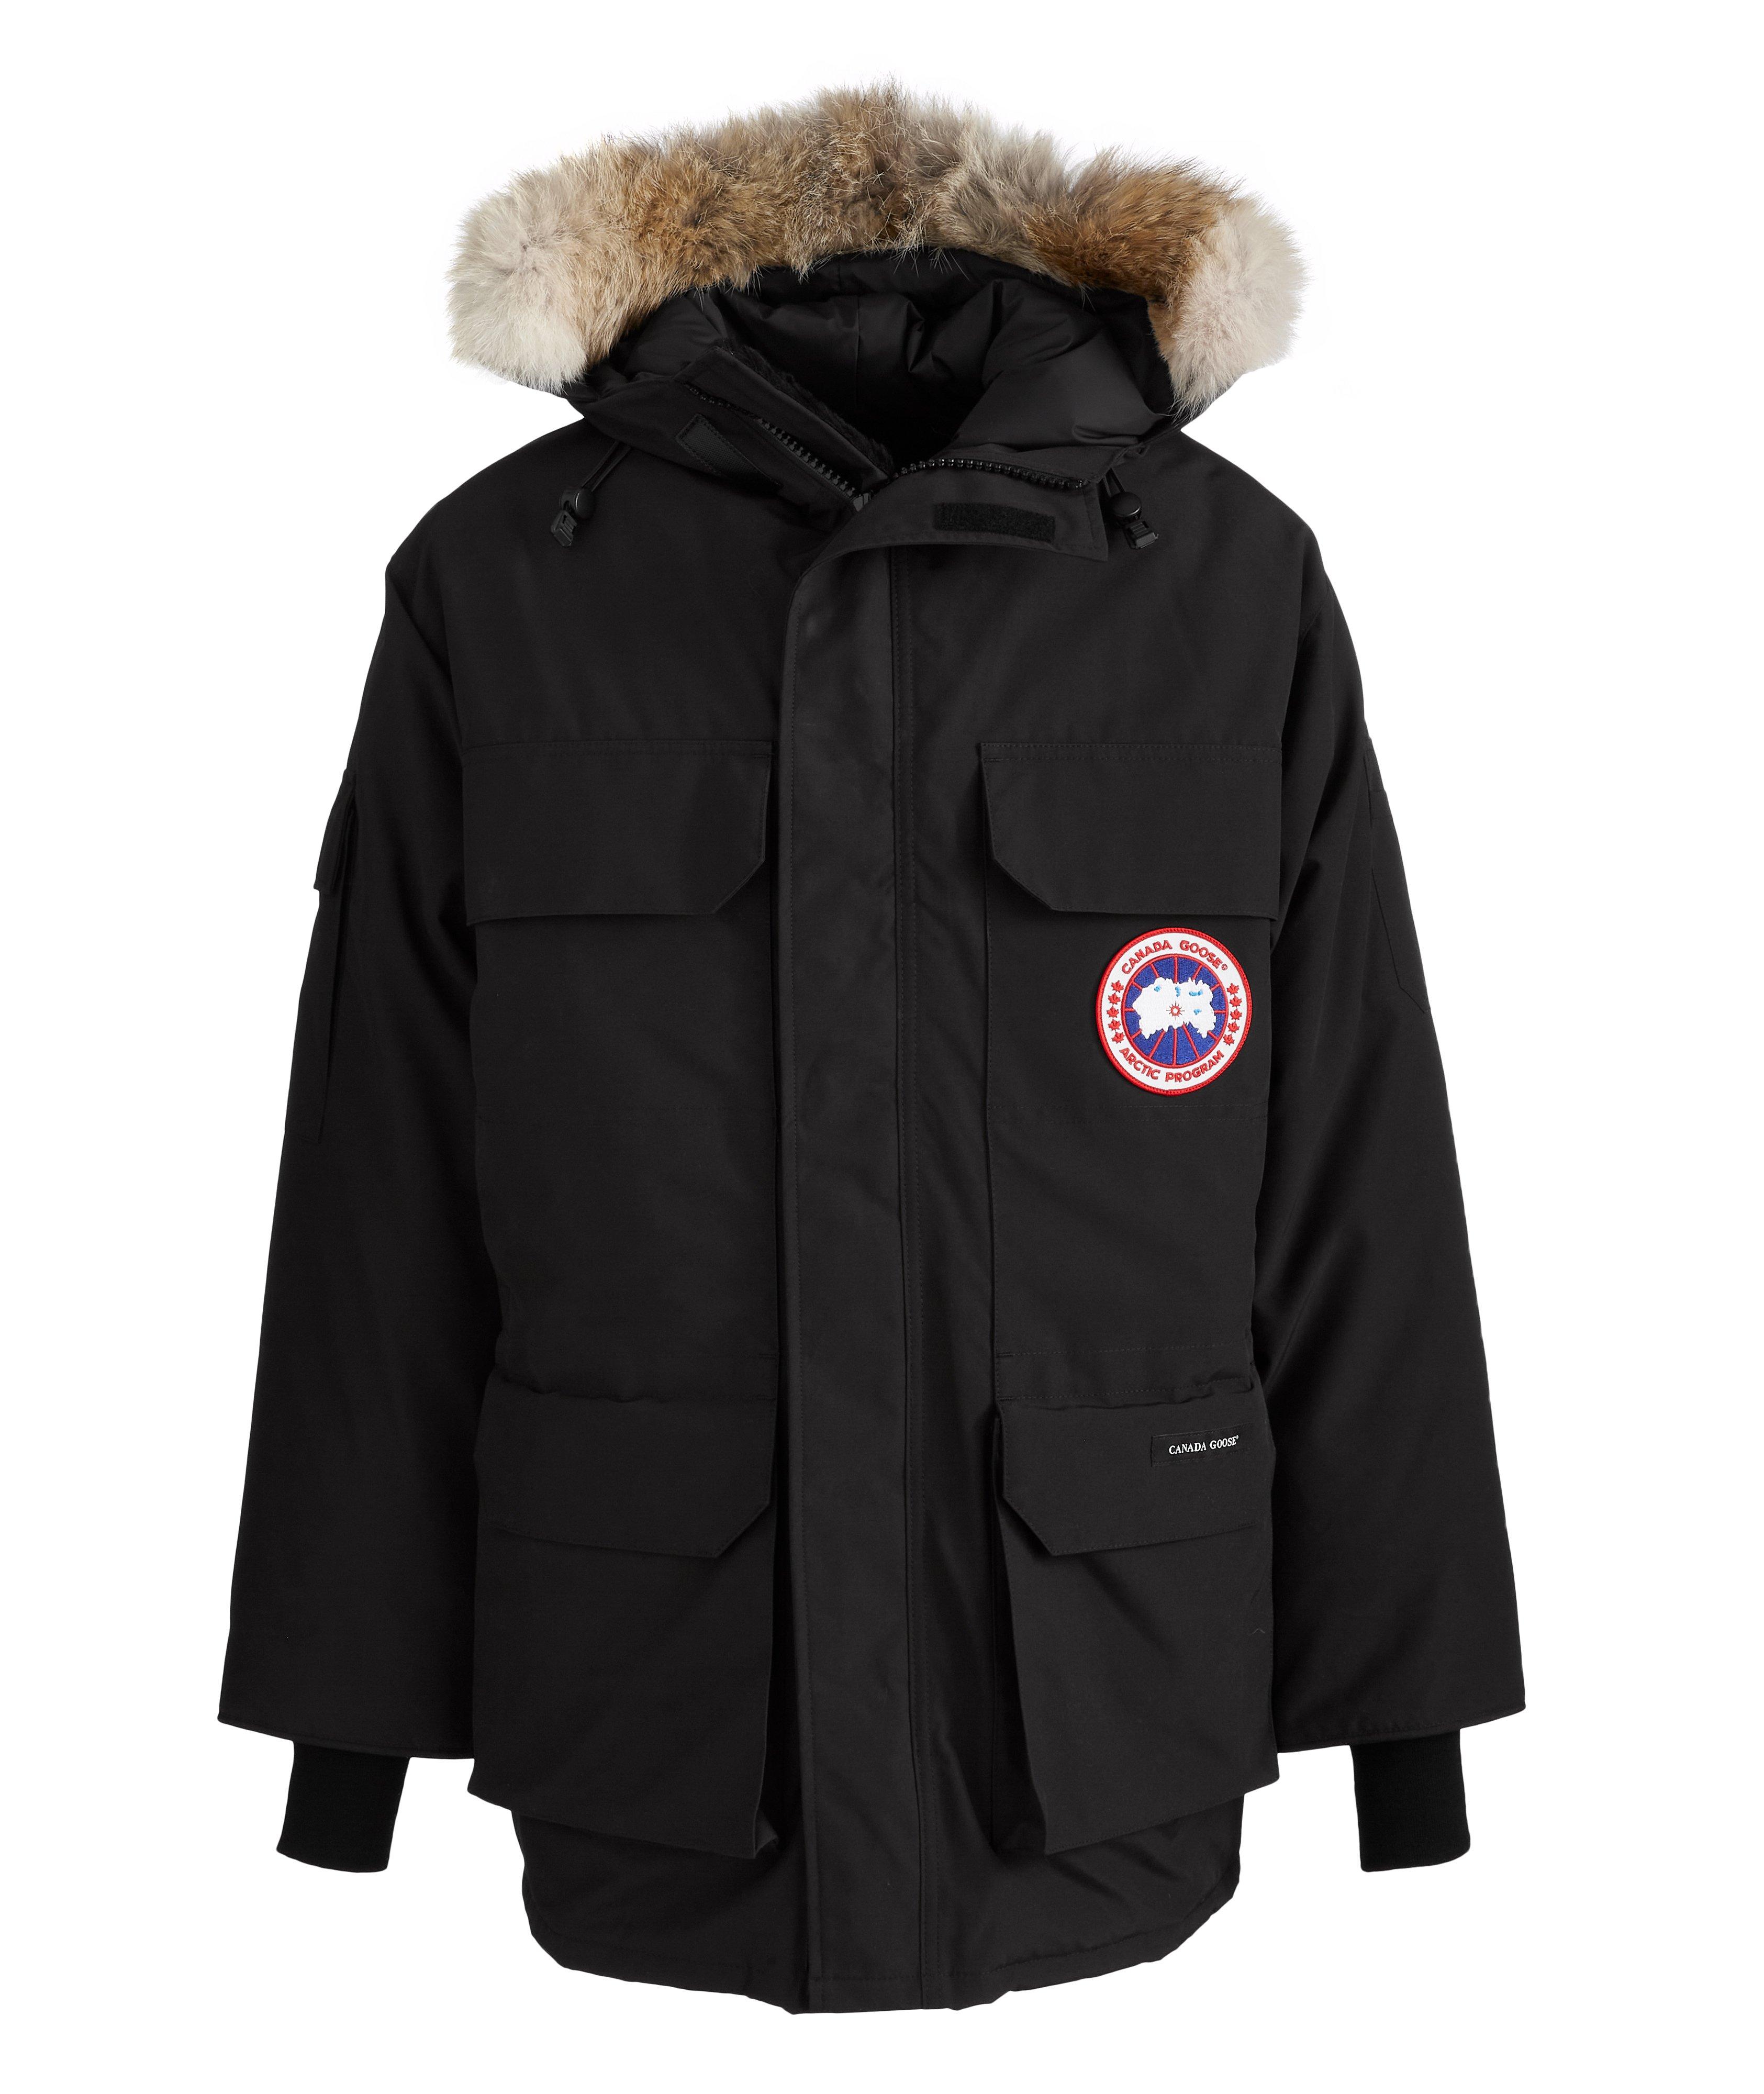 Expedition Down Parka image 0